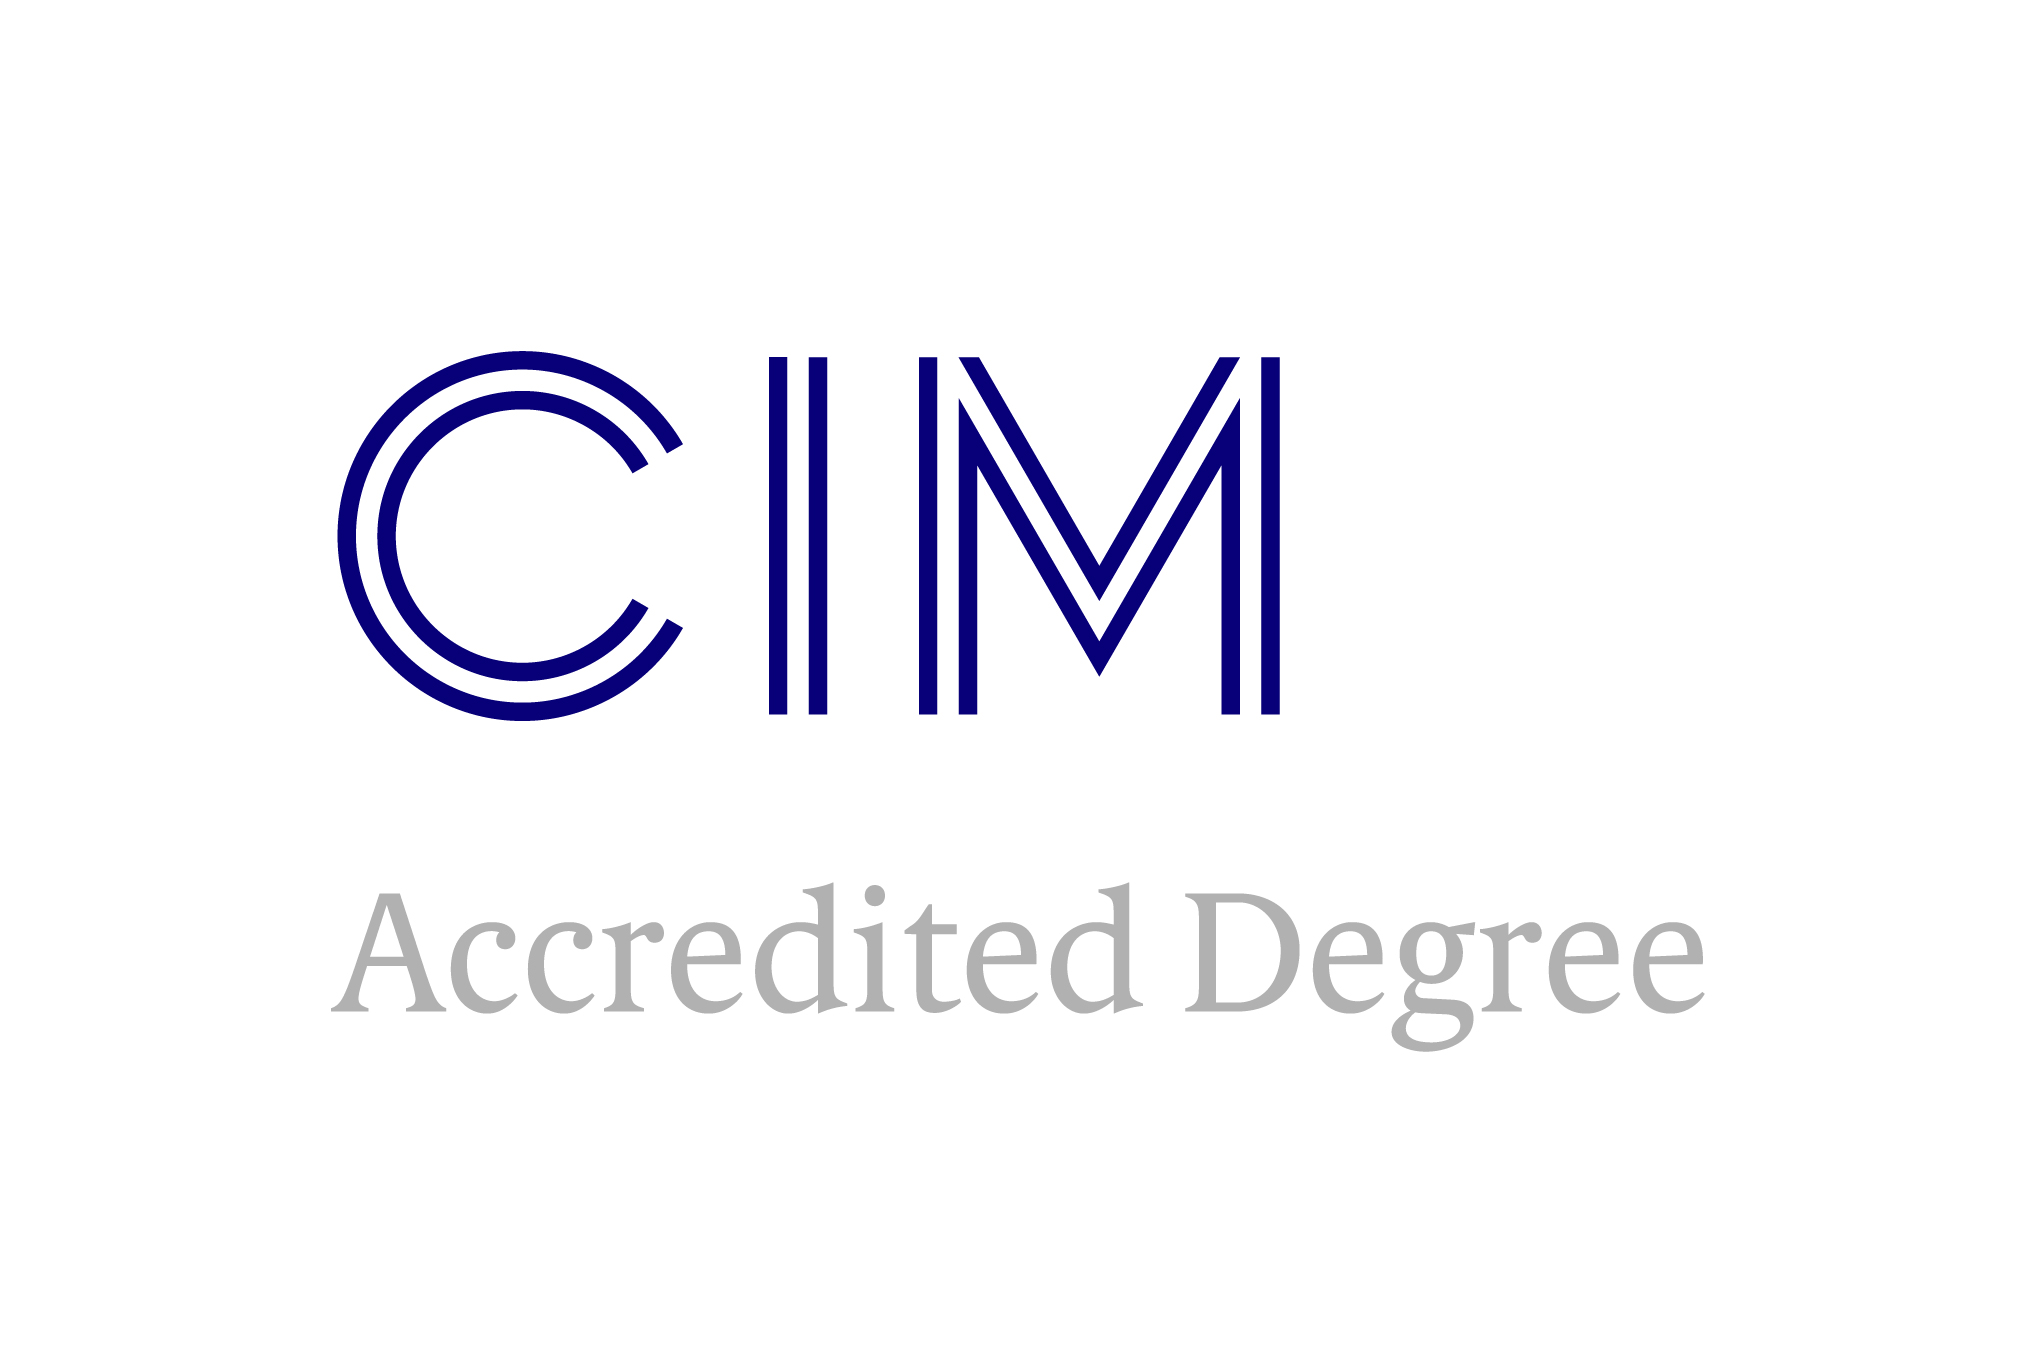 The Chartered Institute of Marketing (CIM) Accredited Degree logo